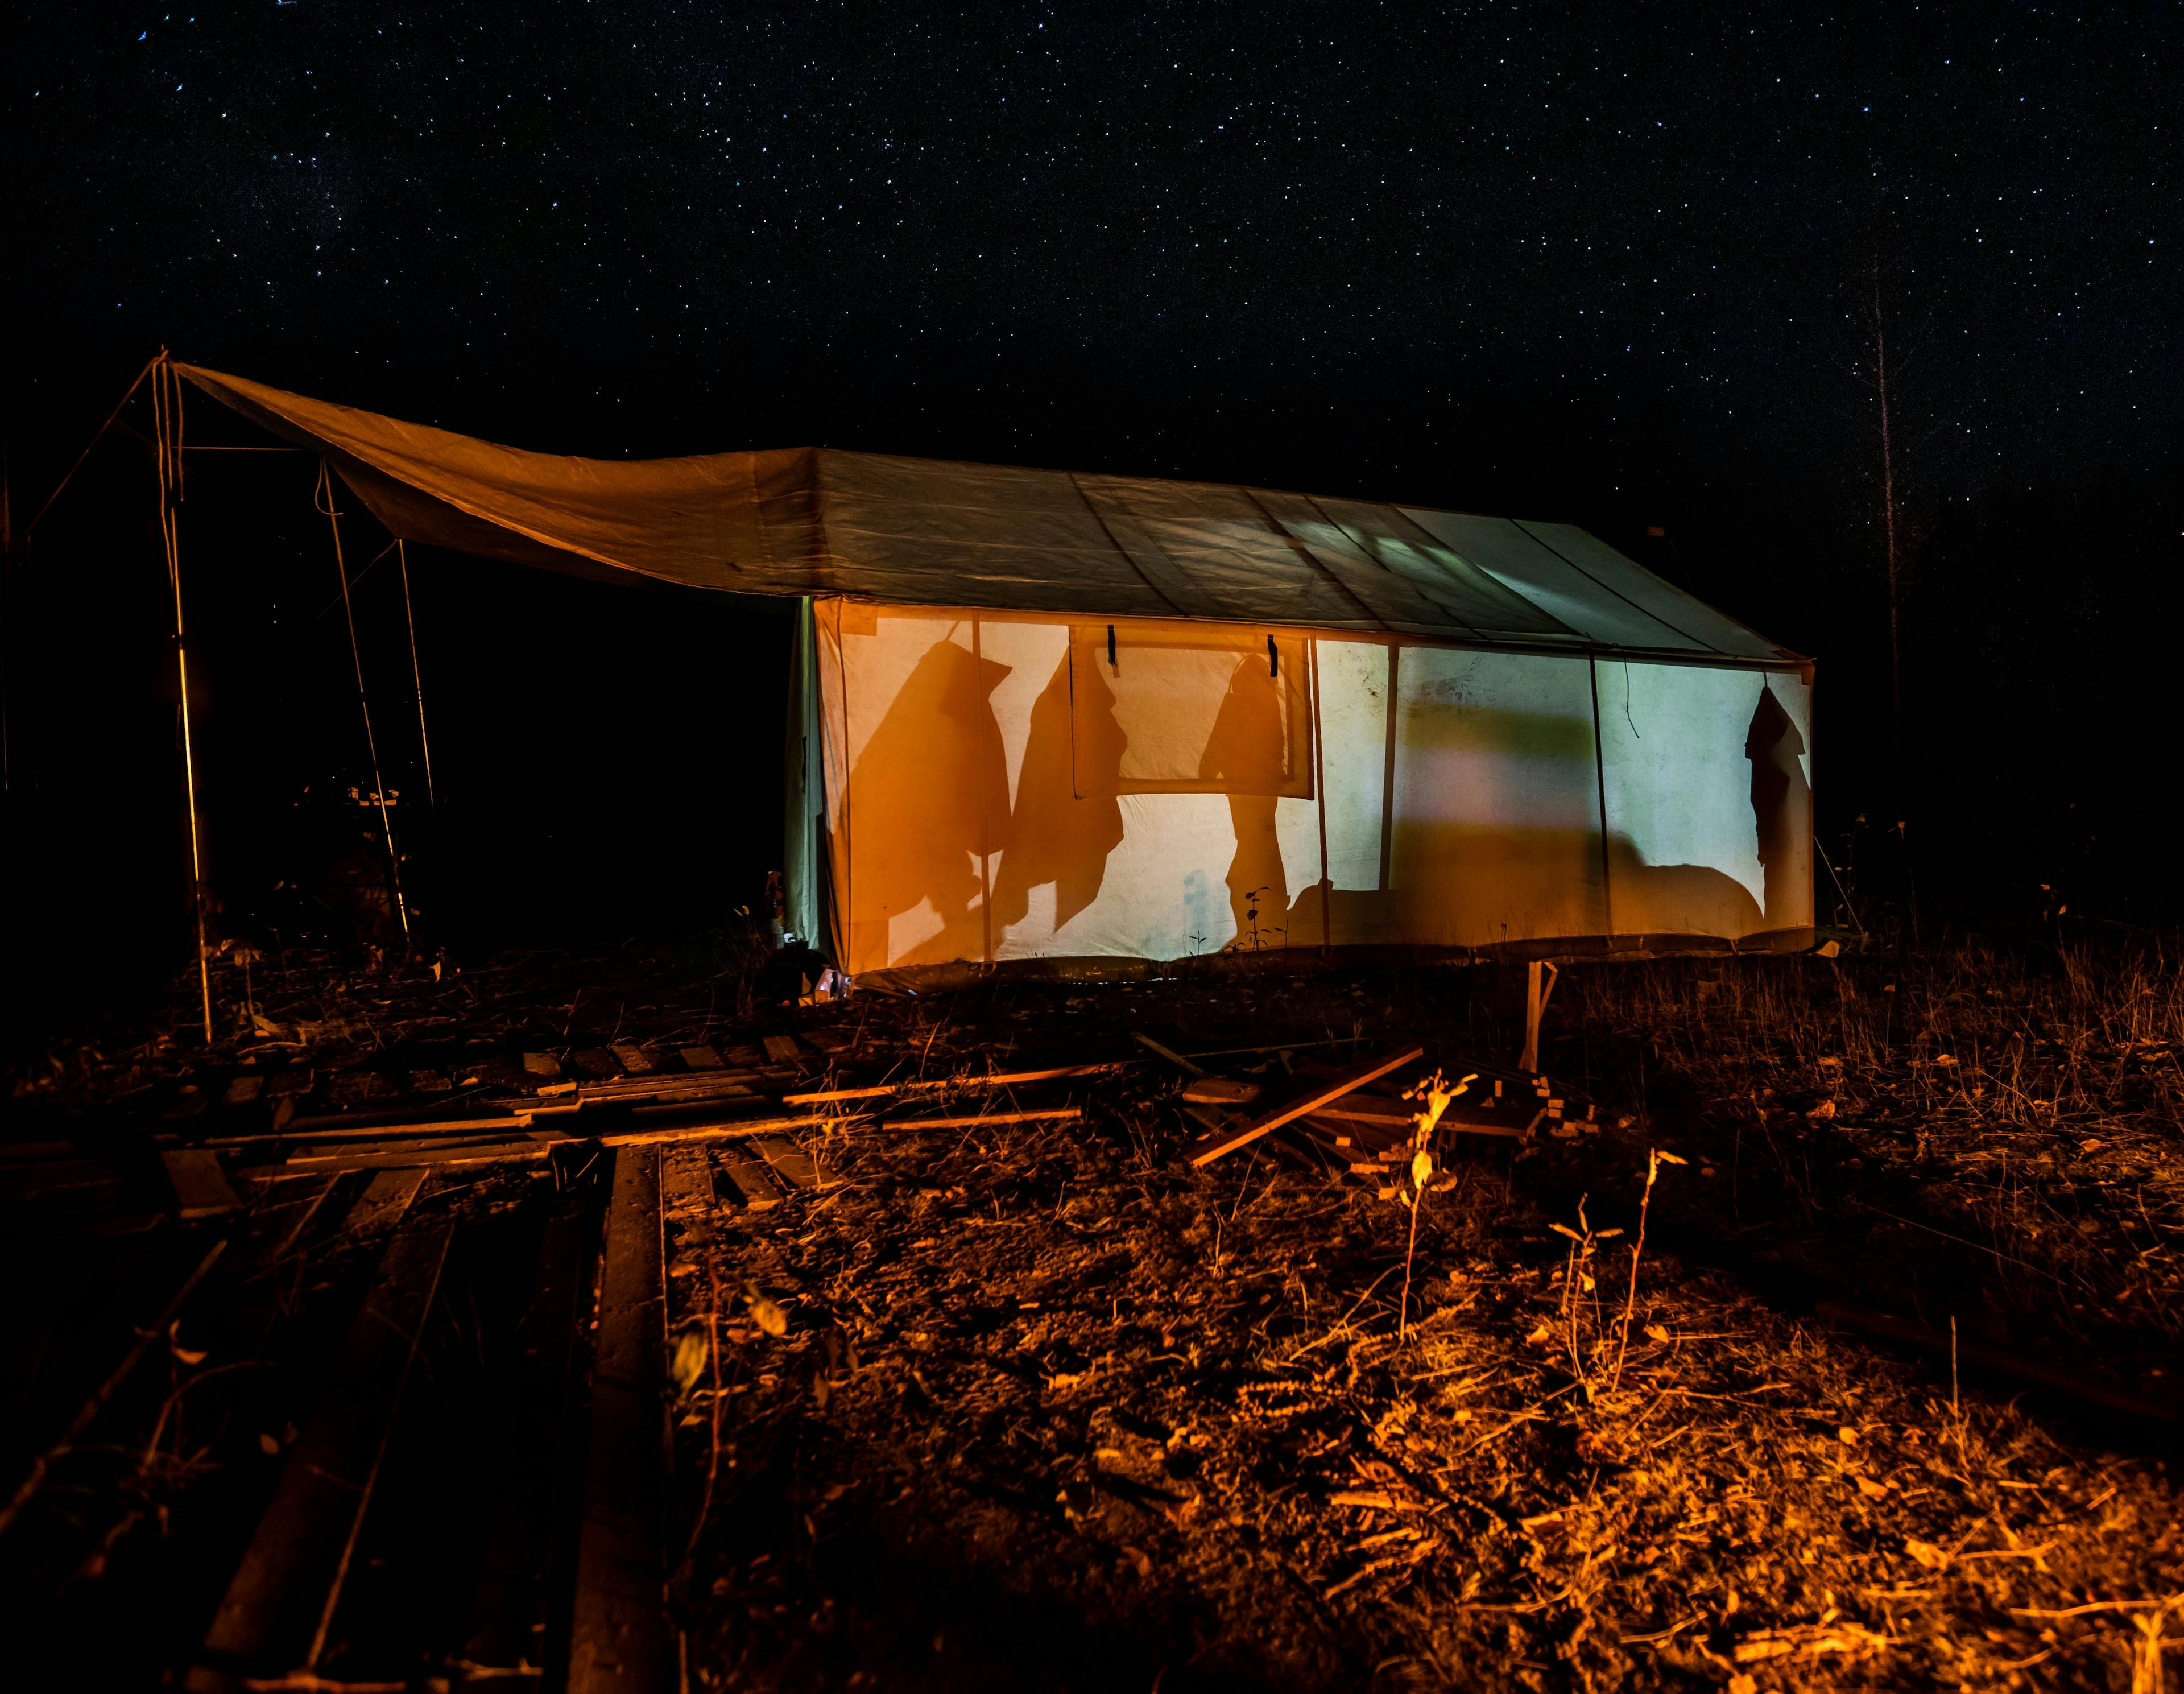 A tent at night time